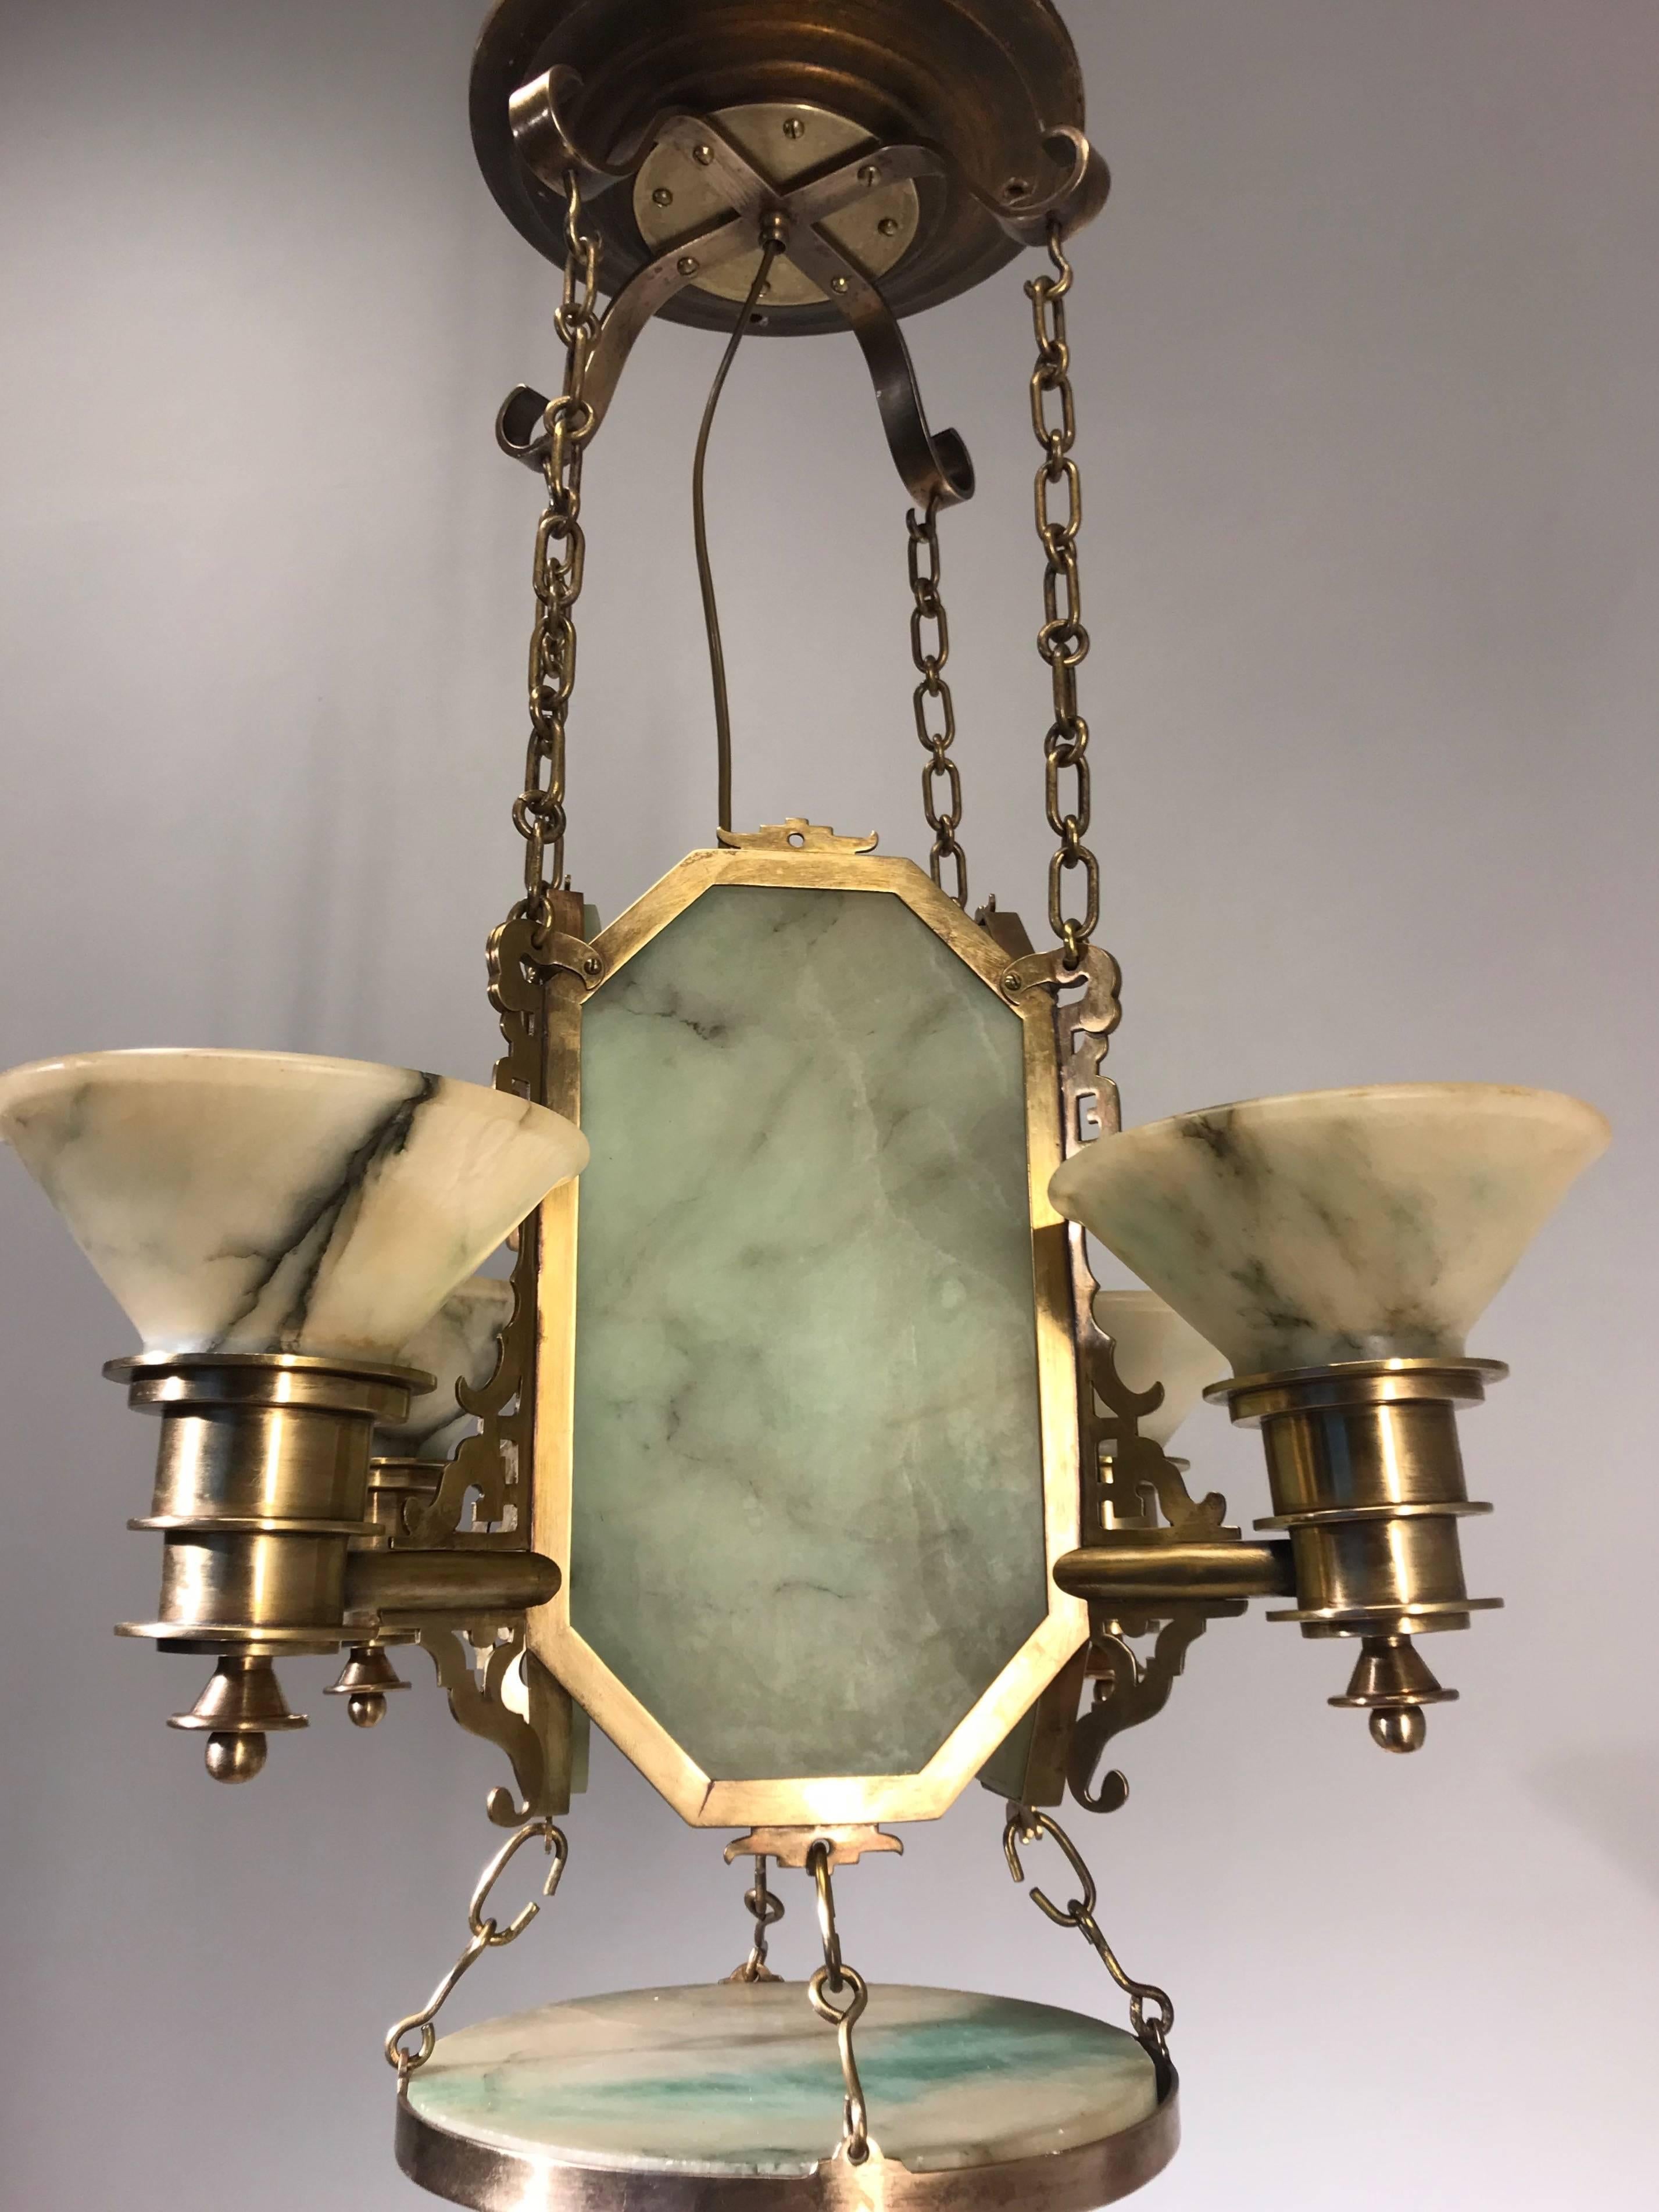 One of a kind, early 1900s Arts & Crafts light fixture.

This antique and extraordinary alabaster pendant is another one of our recent, great finds. The maker of this unique and impressive work of lighting art must have been inspired by Chinese